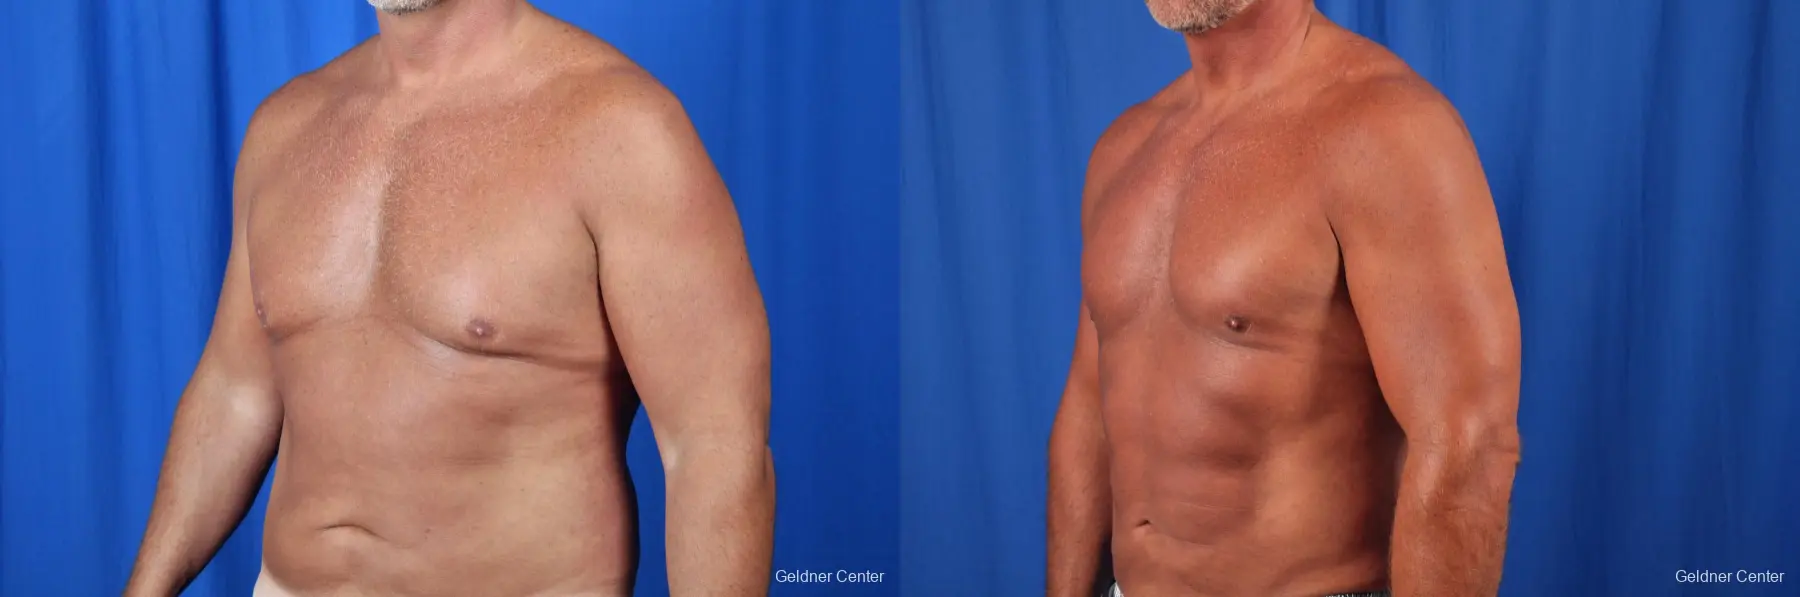 Gynecomastia: Patient 7 - Before and After 4